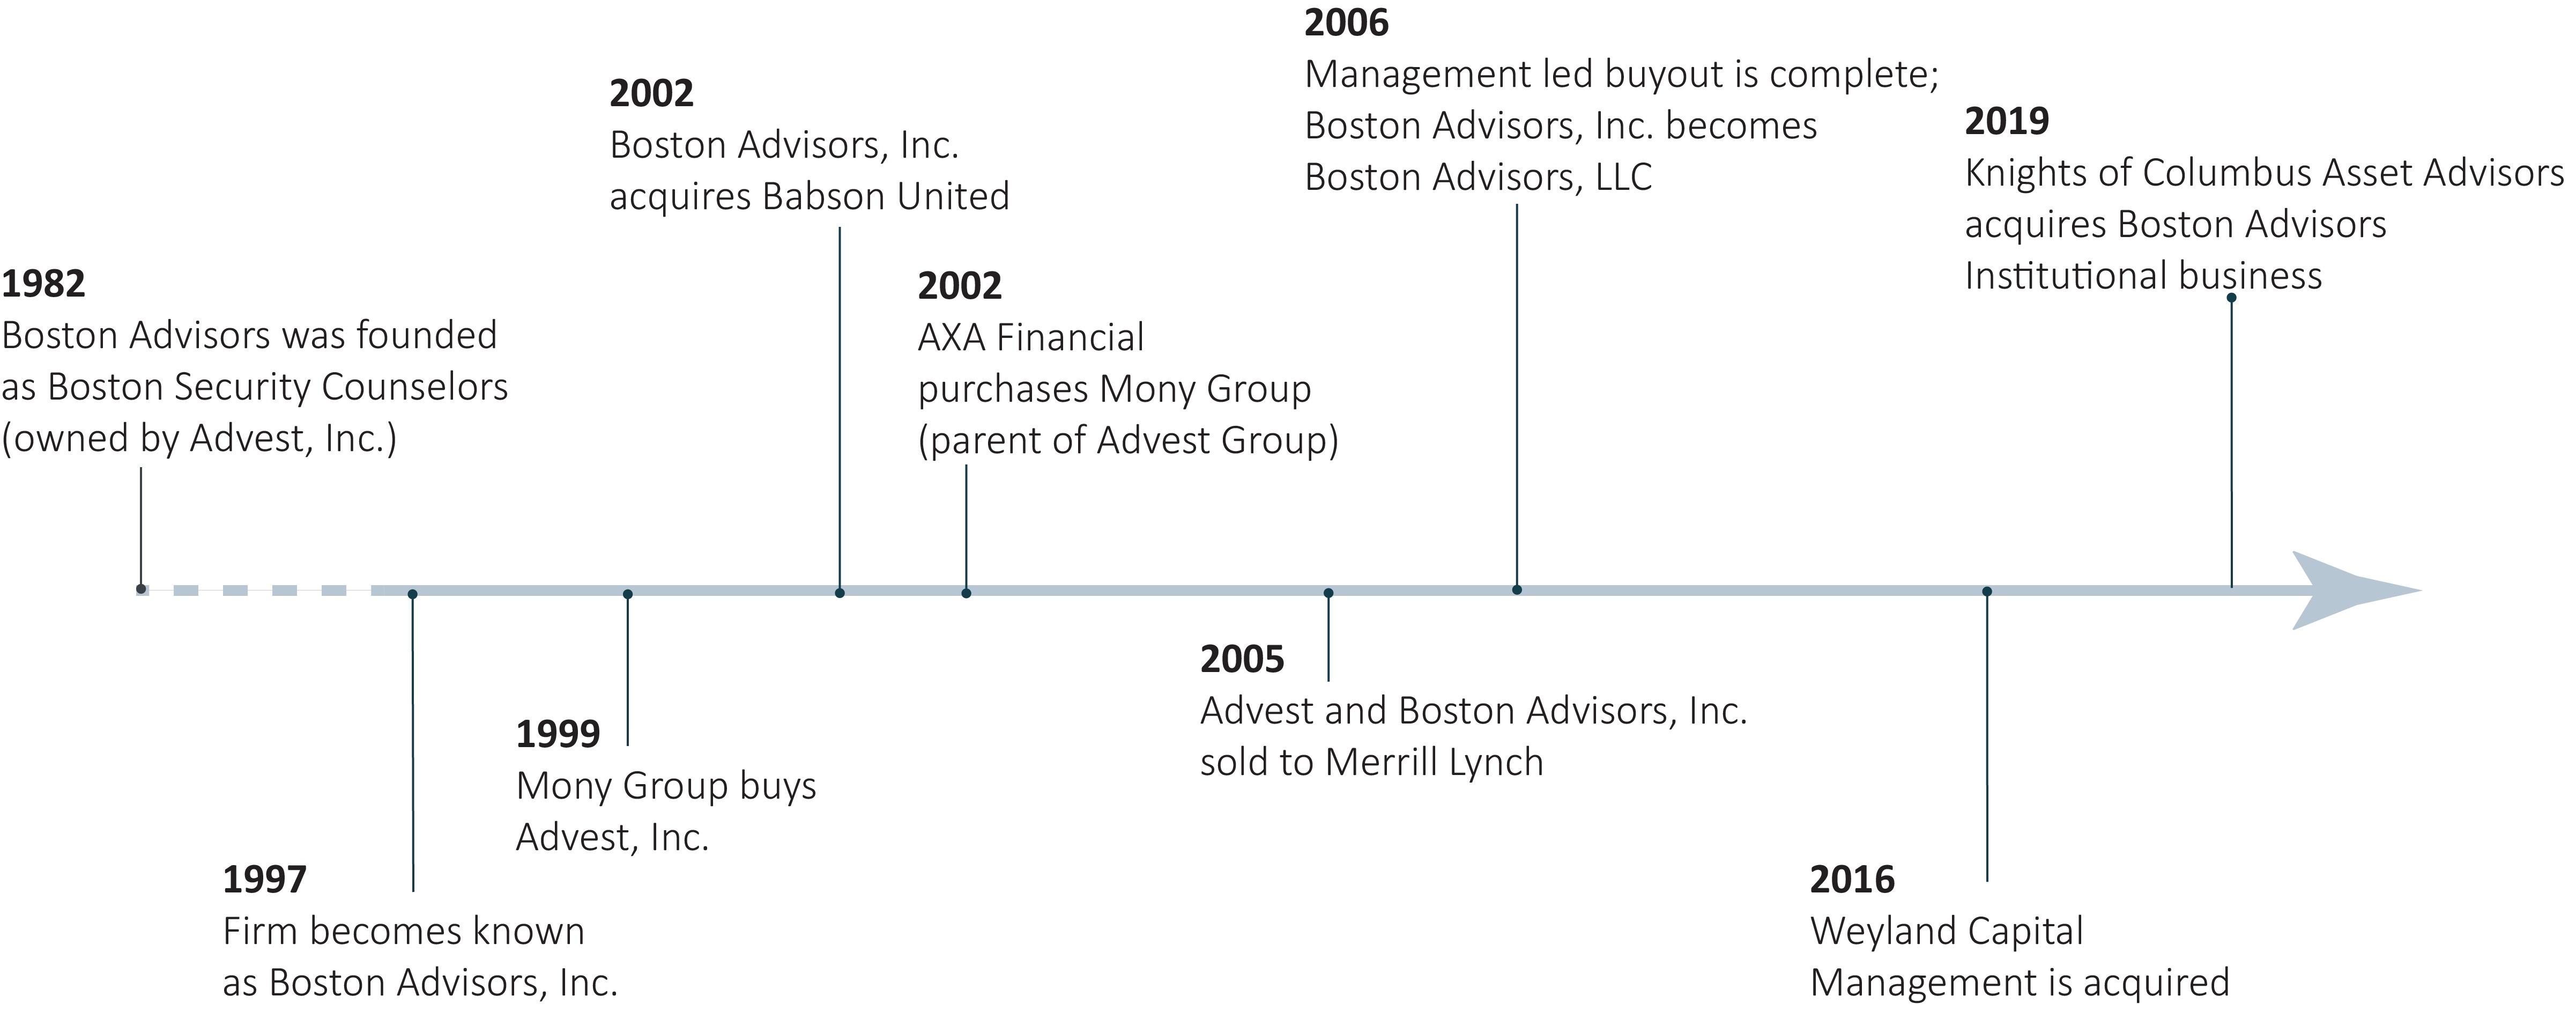 Boston Advisors company history timeline infographic from 1982 to present day